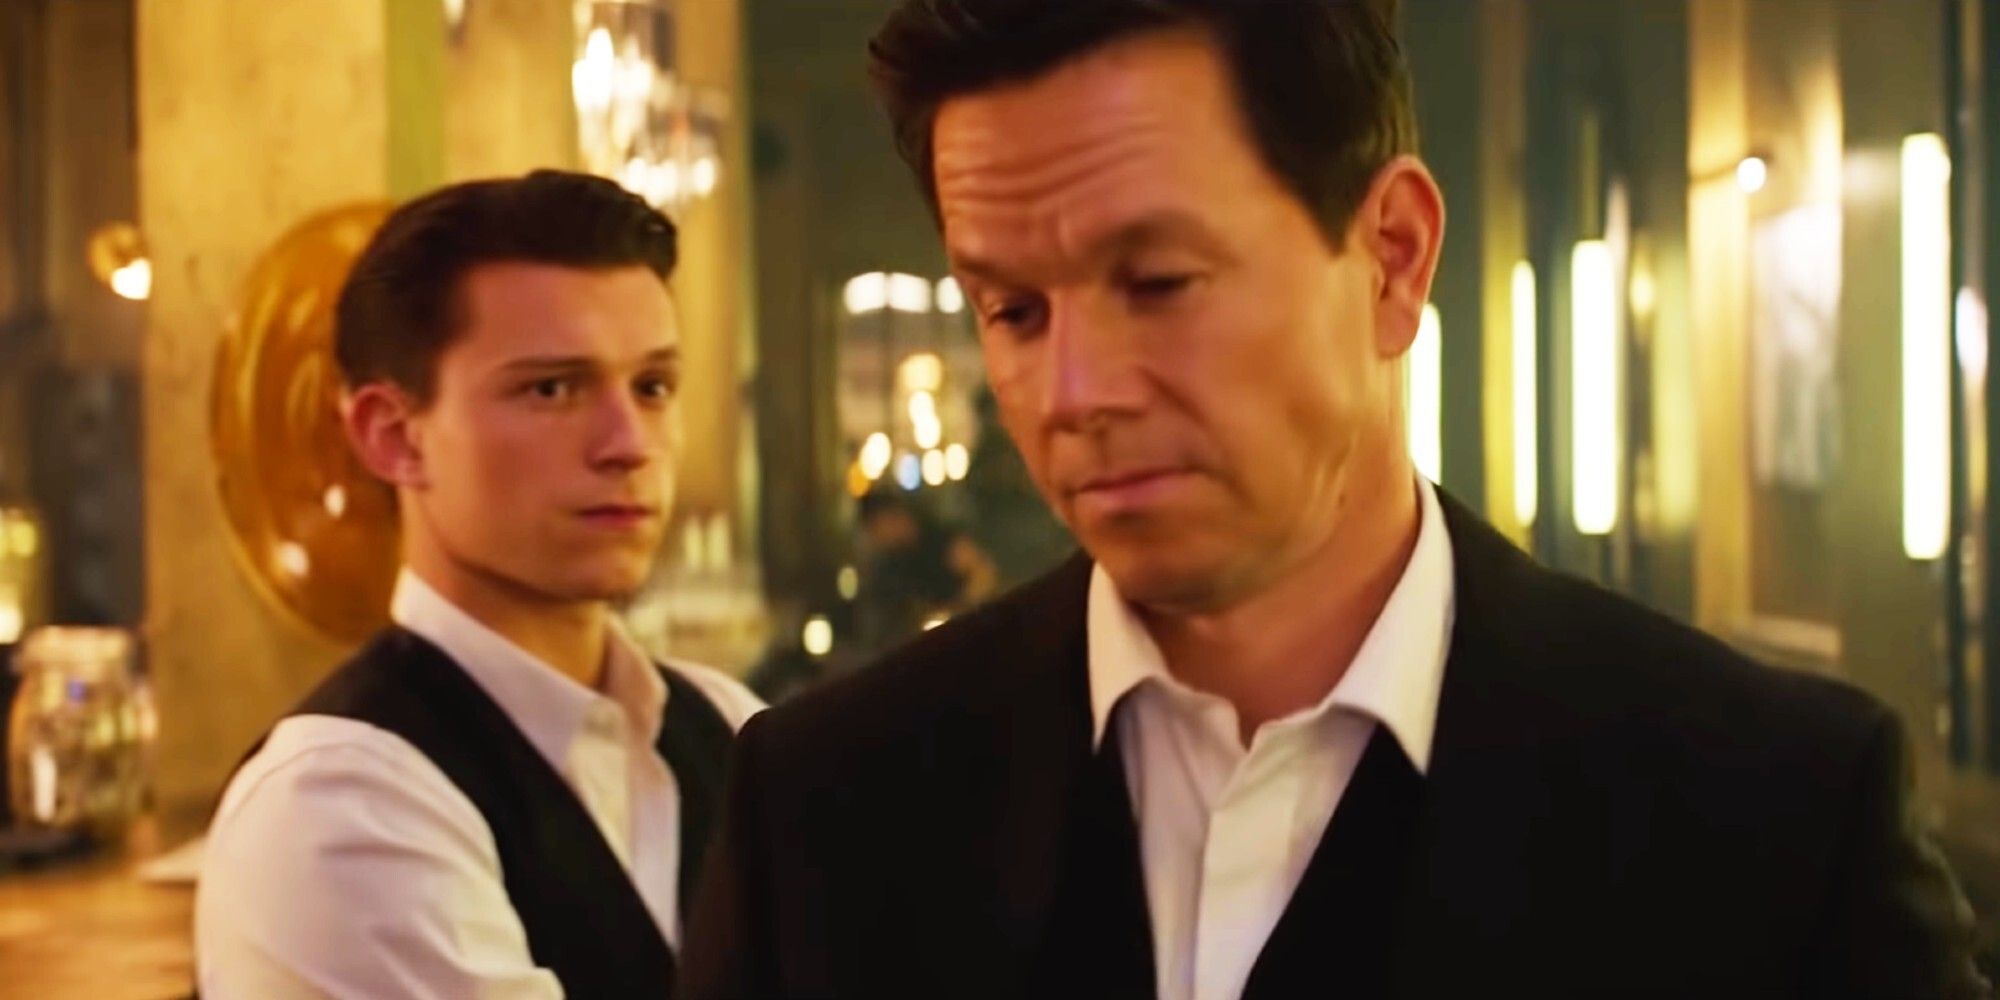 Tom Holland and Mark Wahlberg In Uncharted Movie Footage